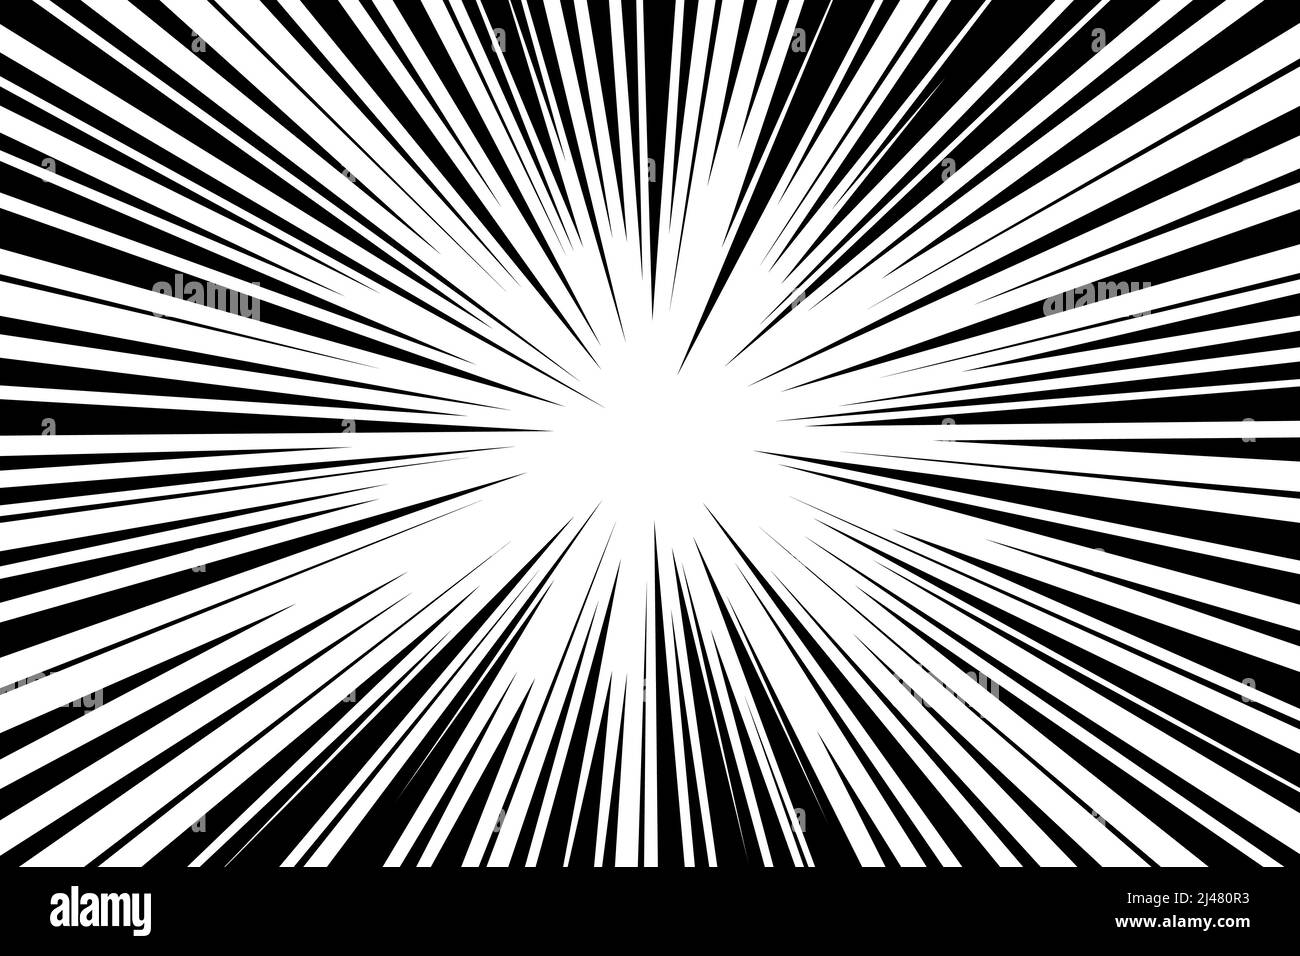 You searched for vector speed background. comic manga illustration with  lines. abstract action black and white drawing. radial speed cartoon.  motion line background